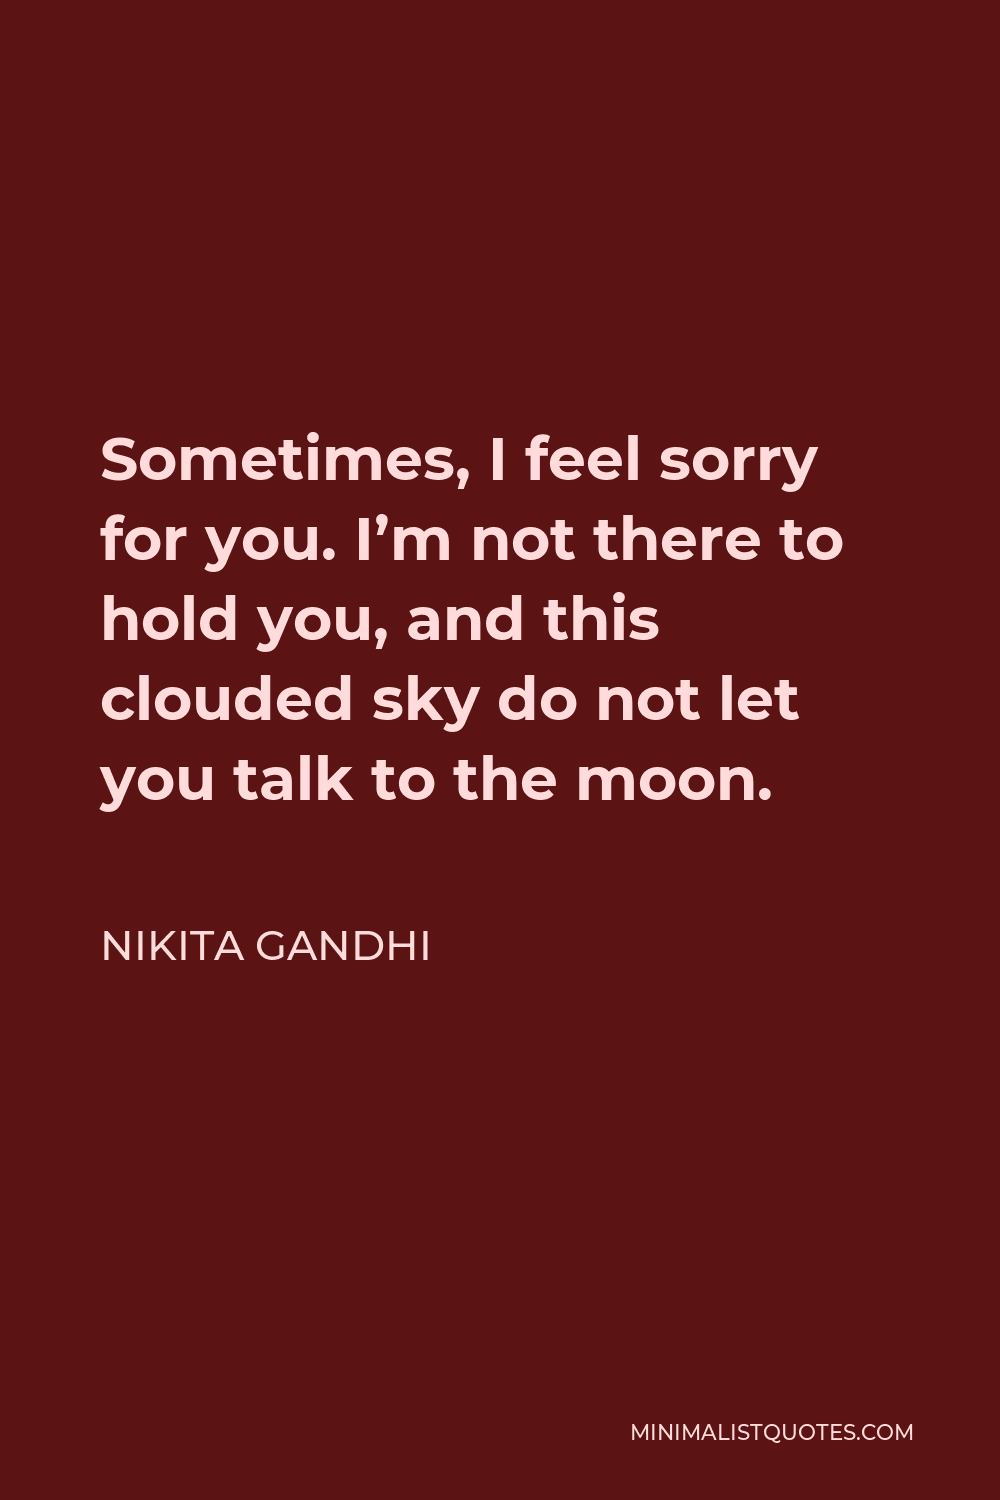 Nikita Gandhi Quote - Sometimes, I feel sorry for you. I’m not there to hold you, and this clouded sky do not let you talk to the moon.